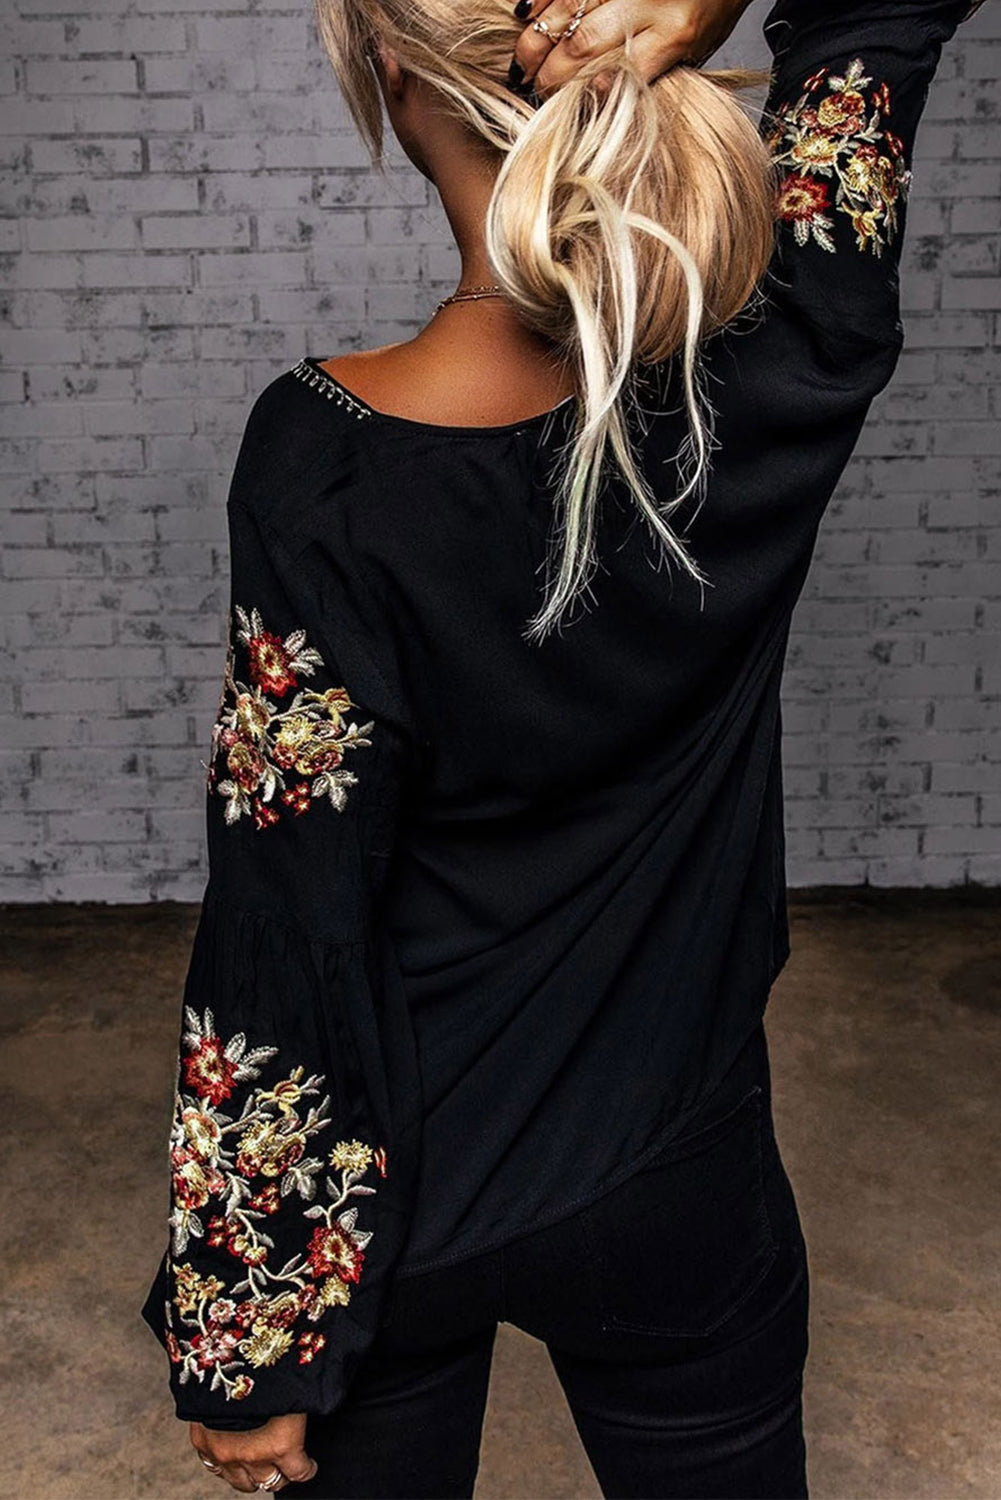 Floral Embroidery Long Sleeve Top